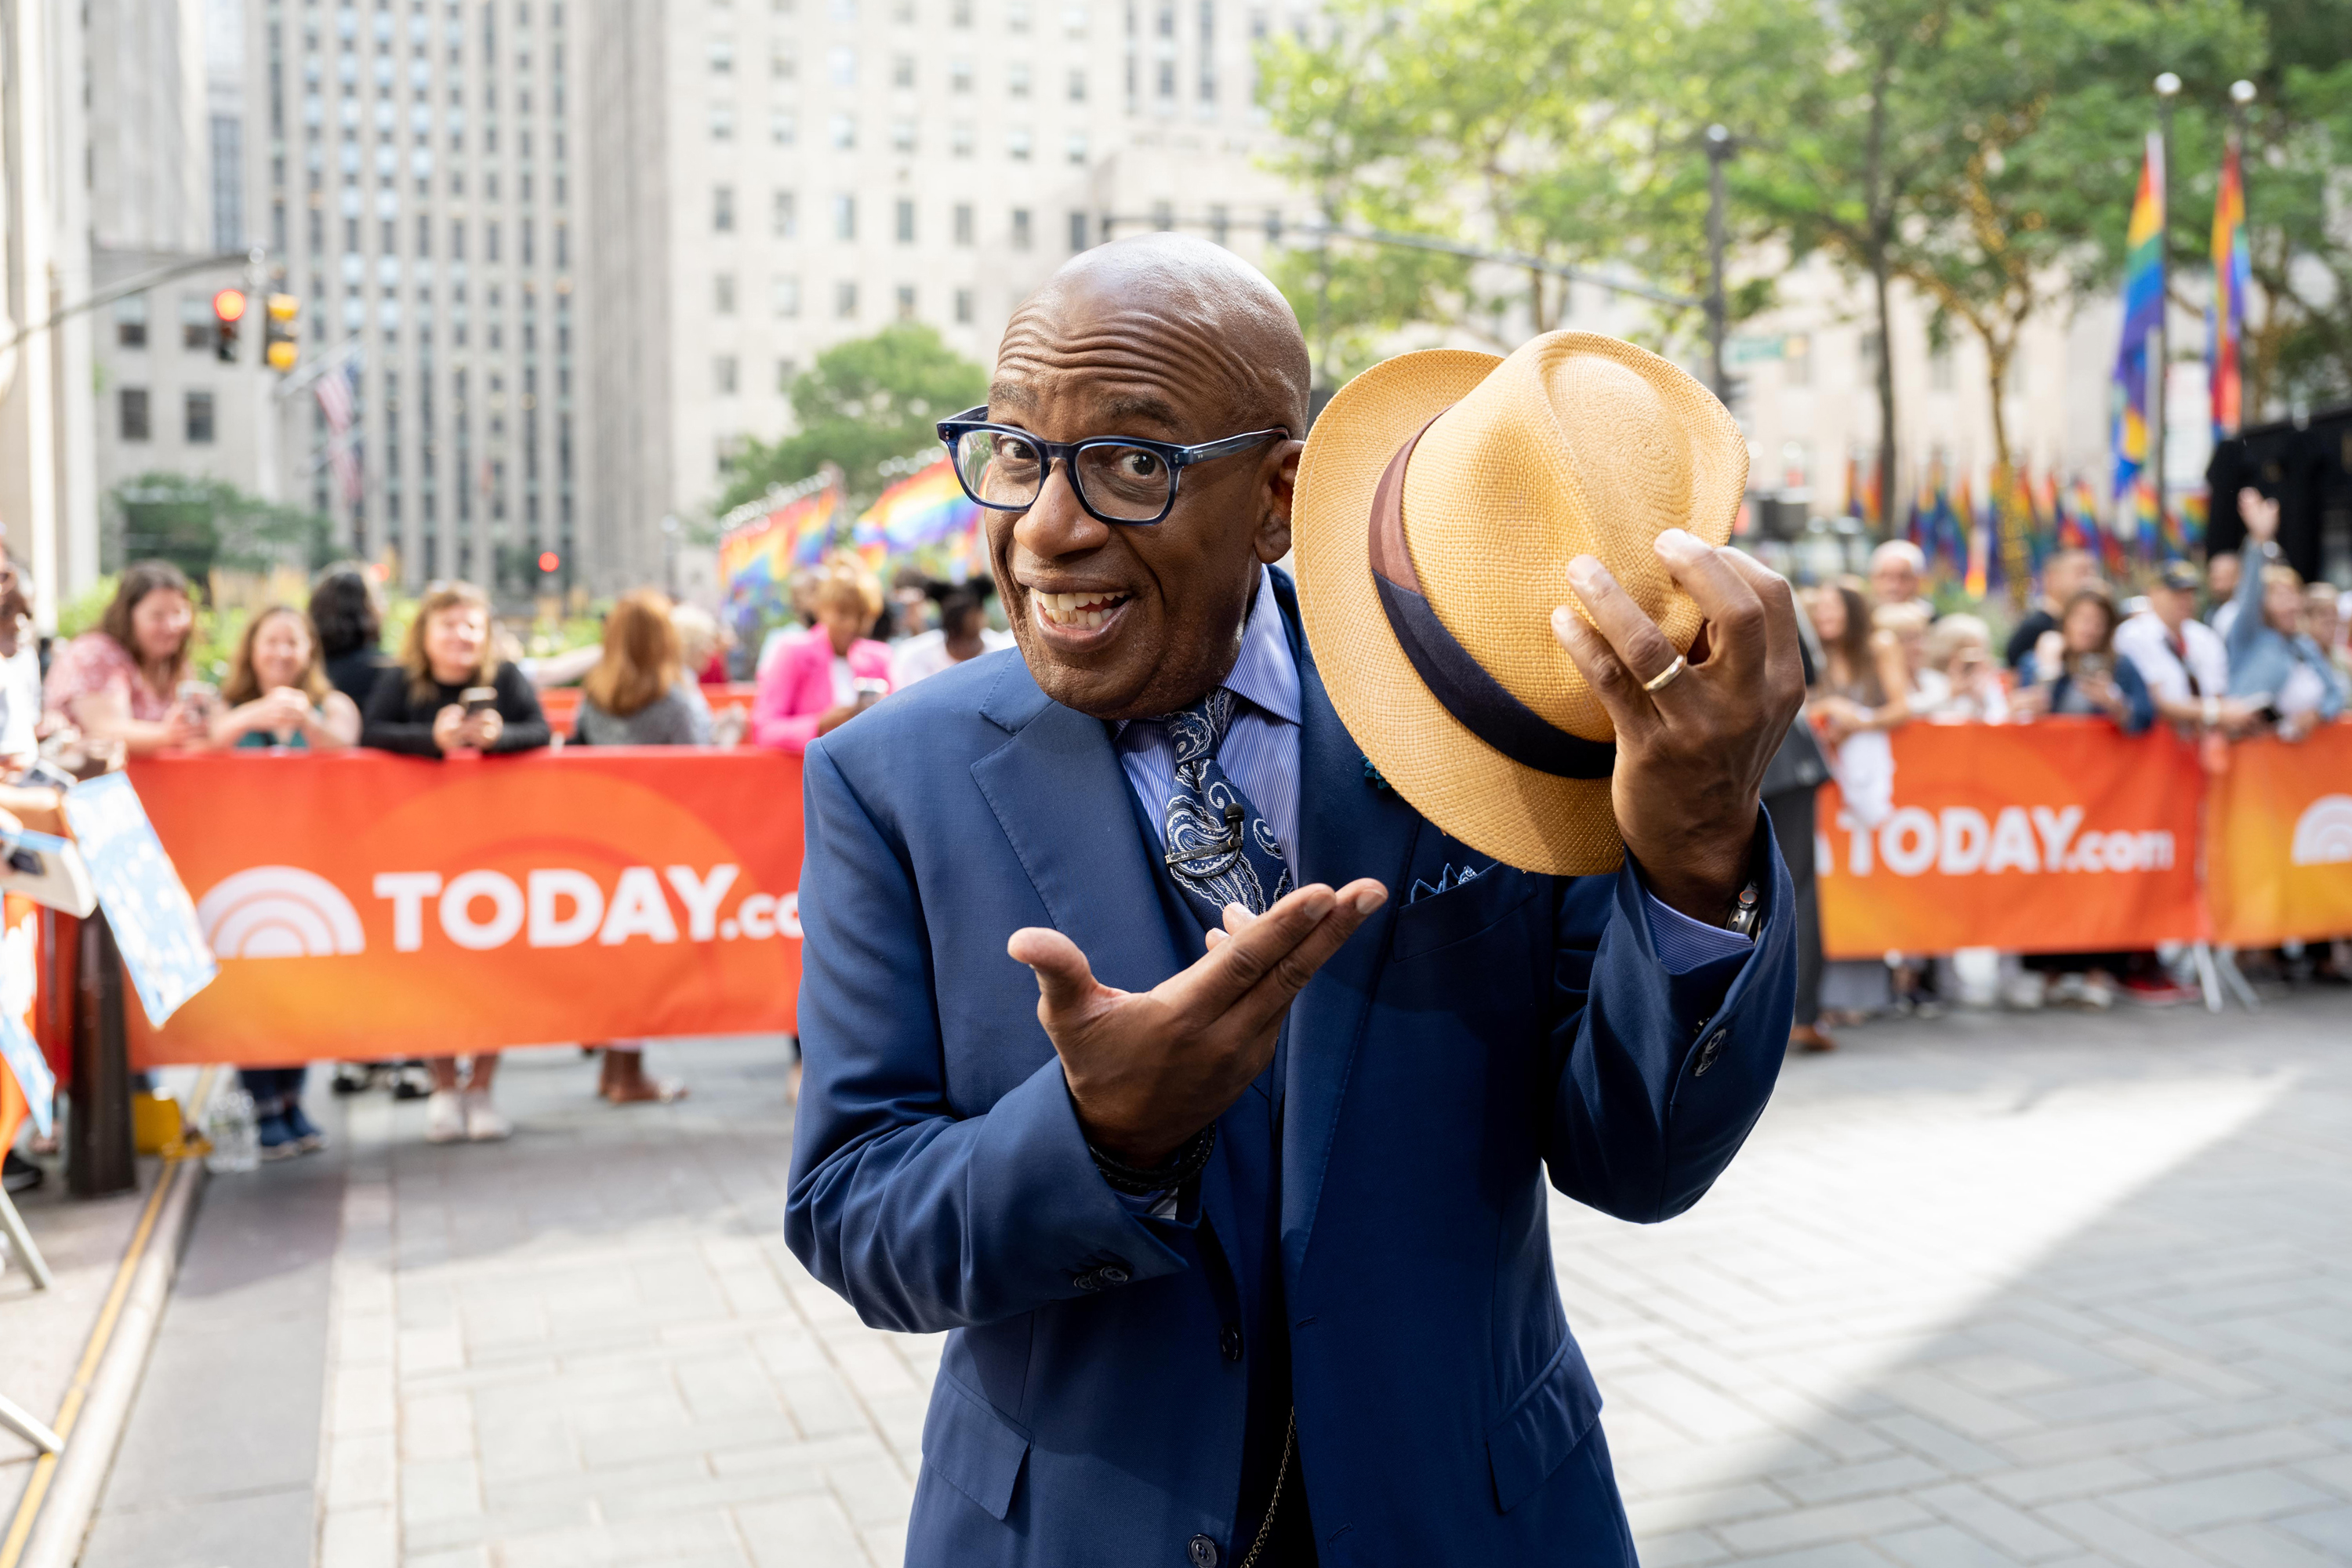 Al Roker during a segment of the "Today" show in 2023. | Source: Getty Images